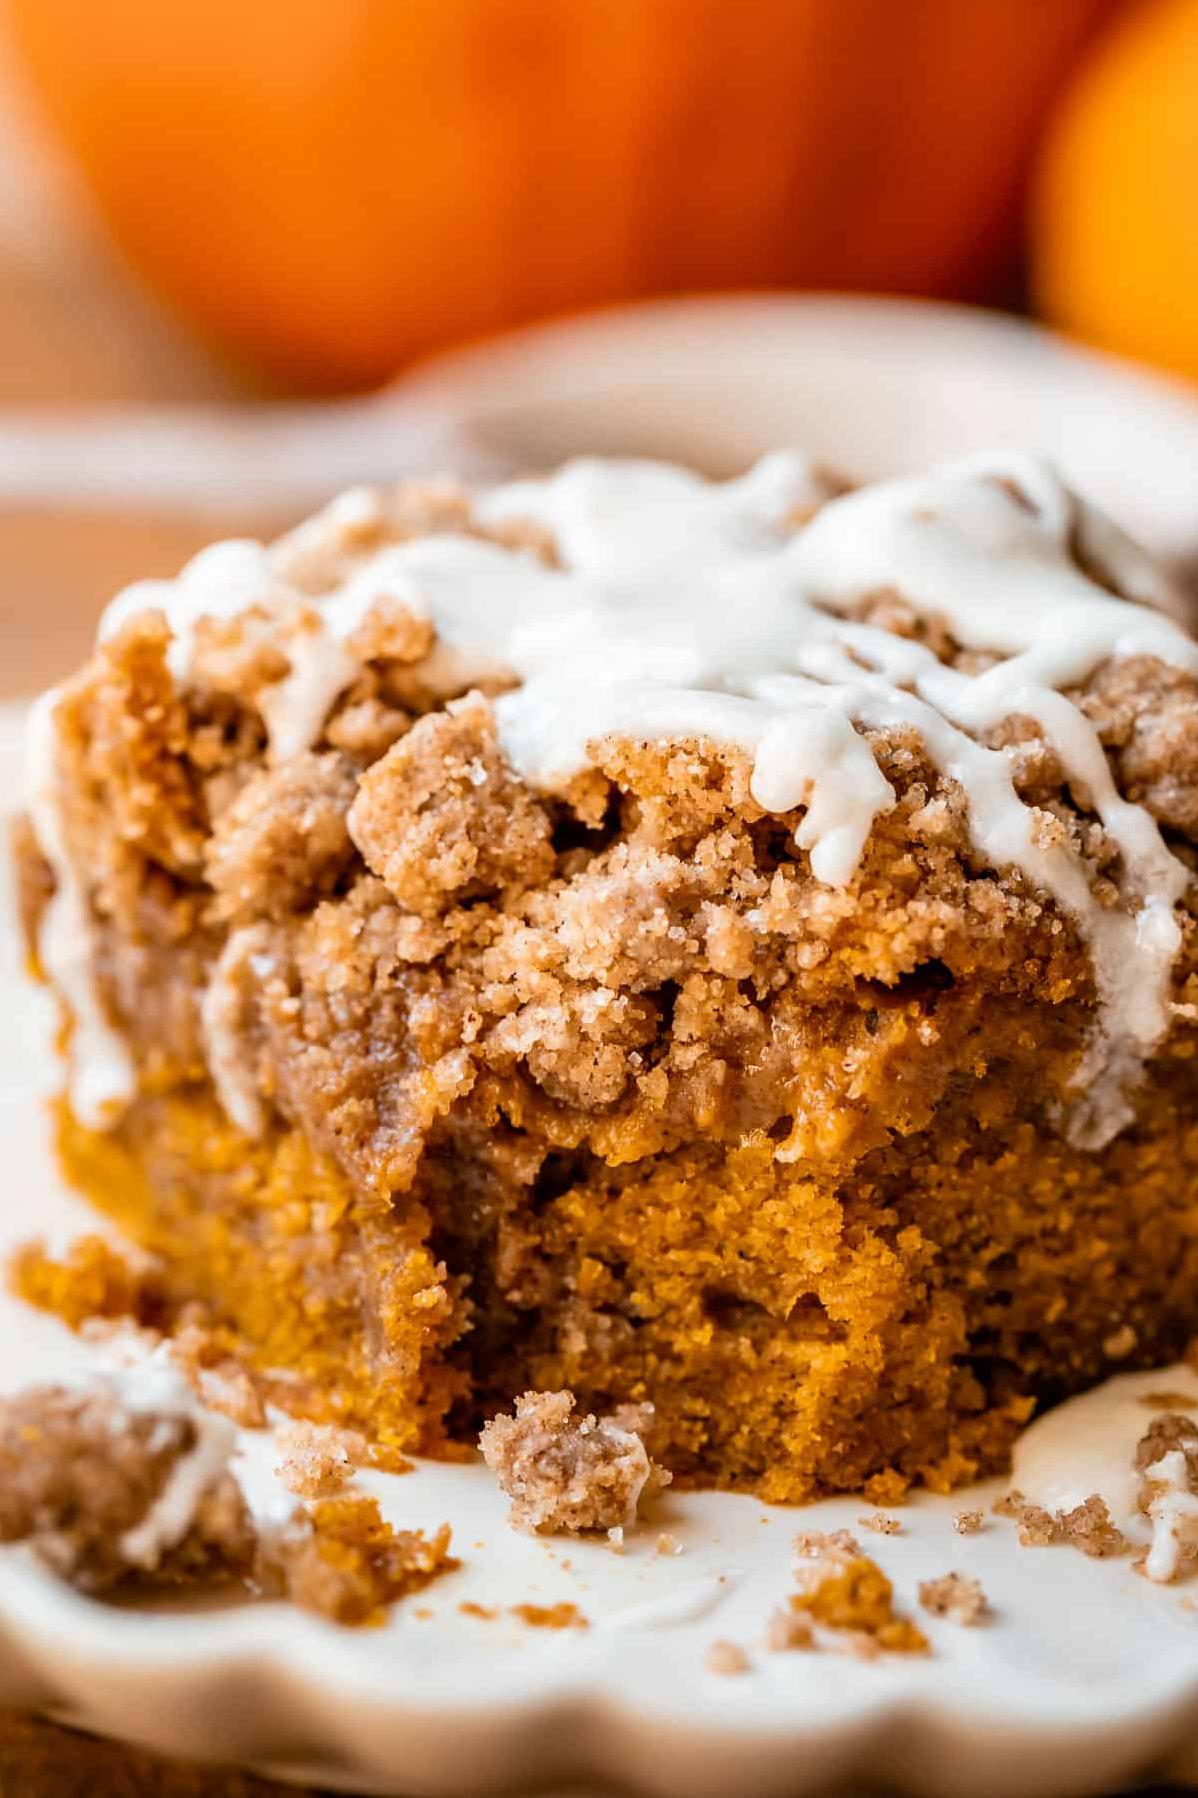  Say hello to your new favorite Fall dessert.